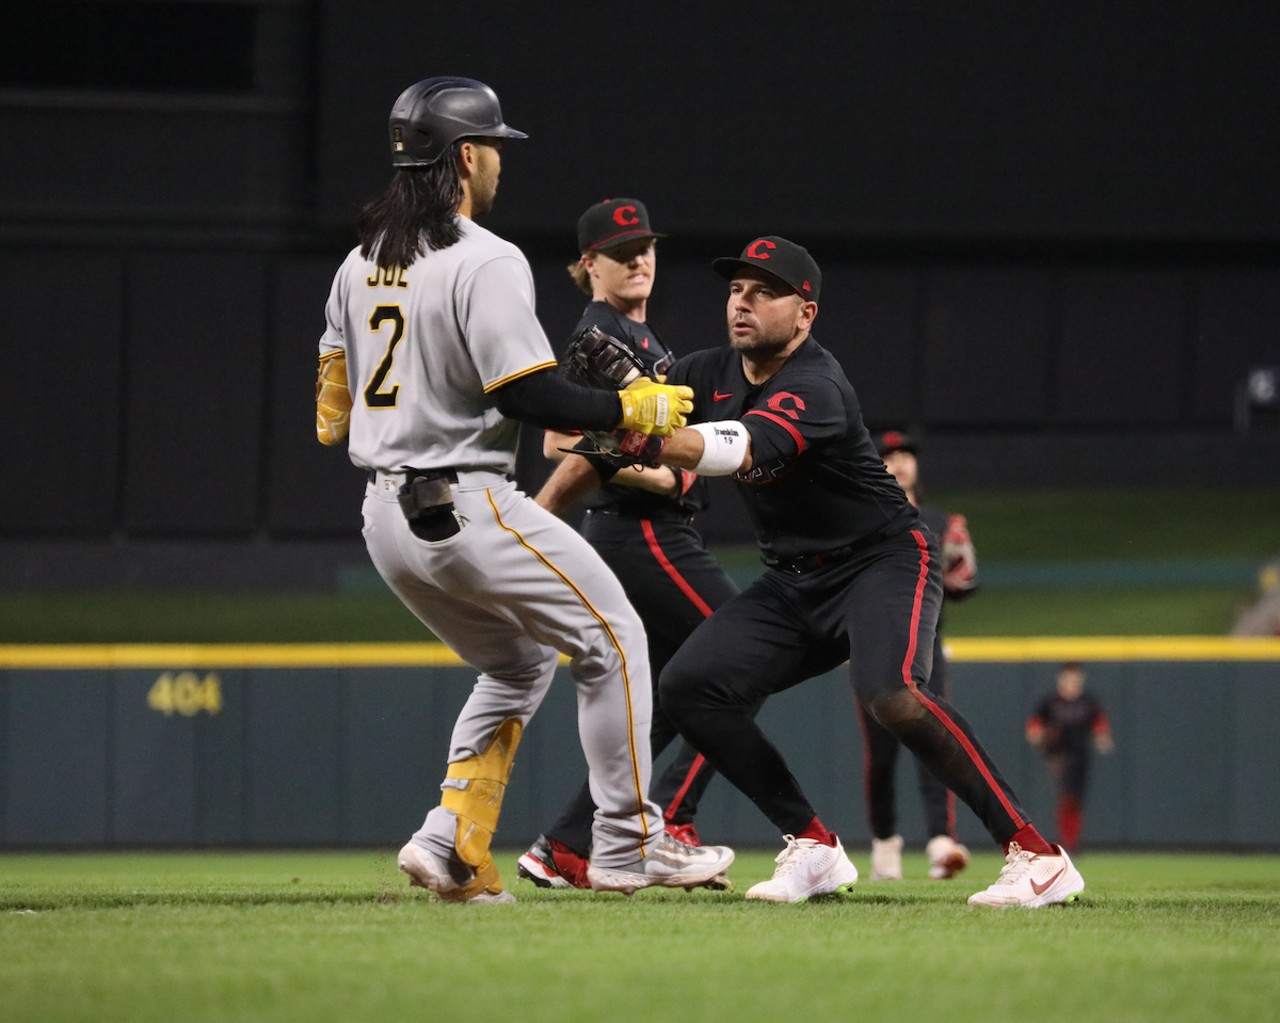 Connor Joe grounds out to first and Joey Votto tags Joe out in the top of the third inning | Cincinnati Reds vs. Pittsburgh Pirates | Sept. 22, 2023